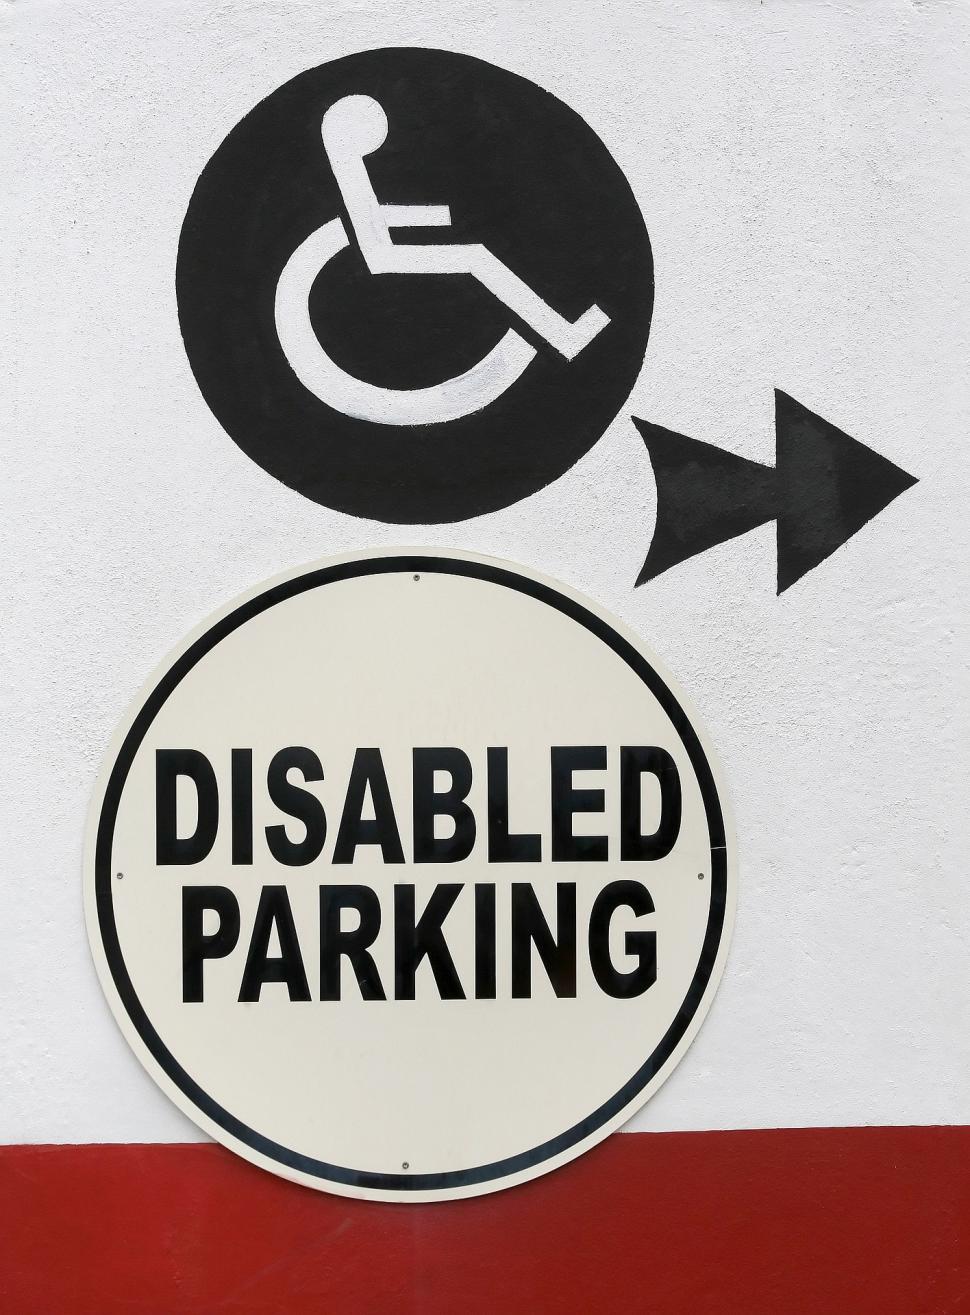 Free Image of Handicapped Parking Sign With Arrows Pointing in Different Directions 